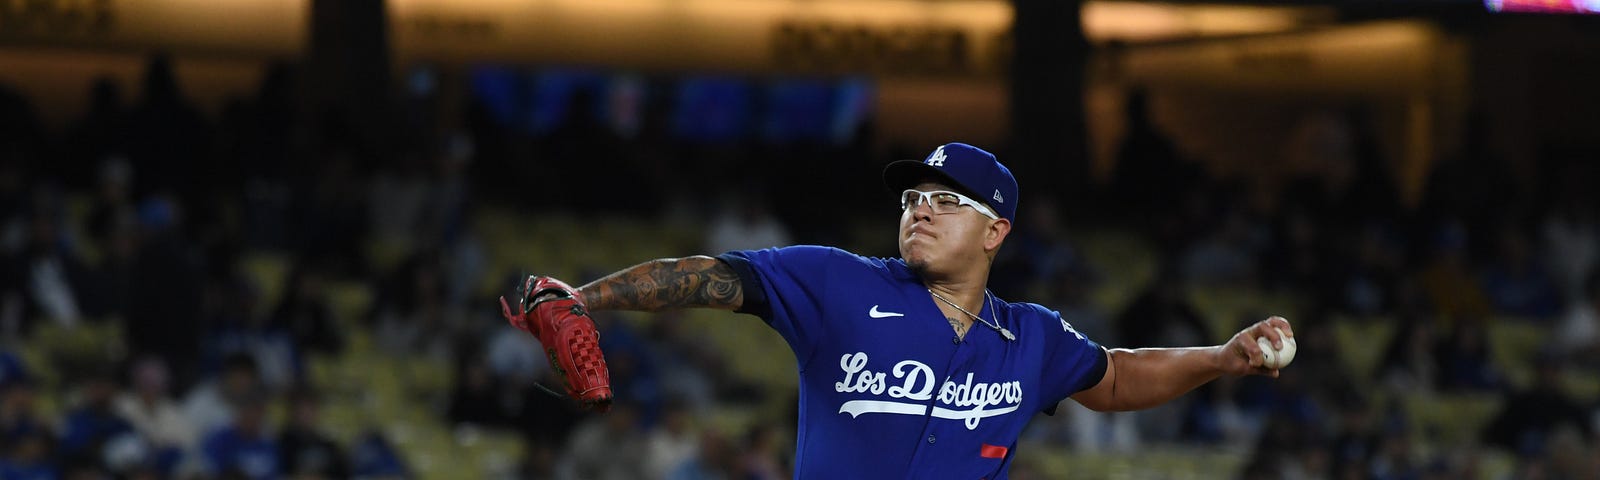 Vargas' spectacular play highlights Dodgers' spring intra-squad